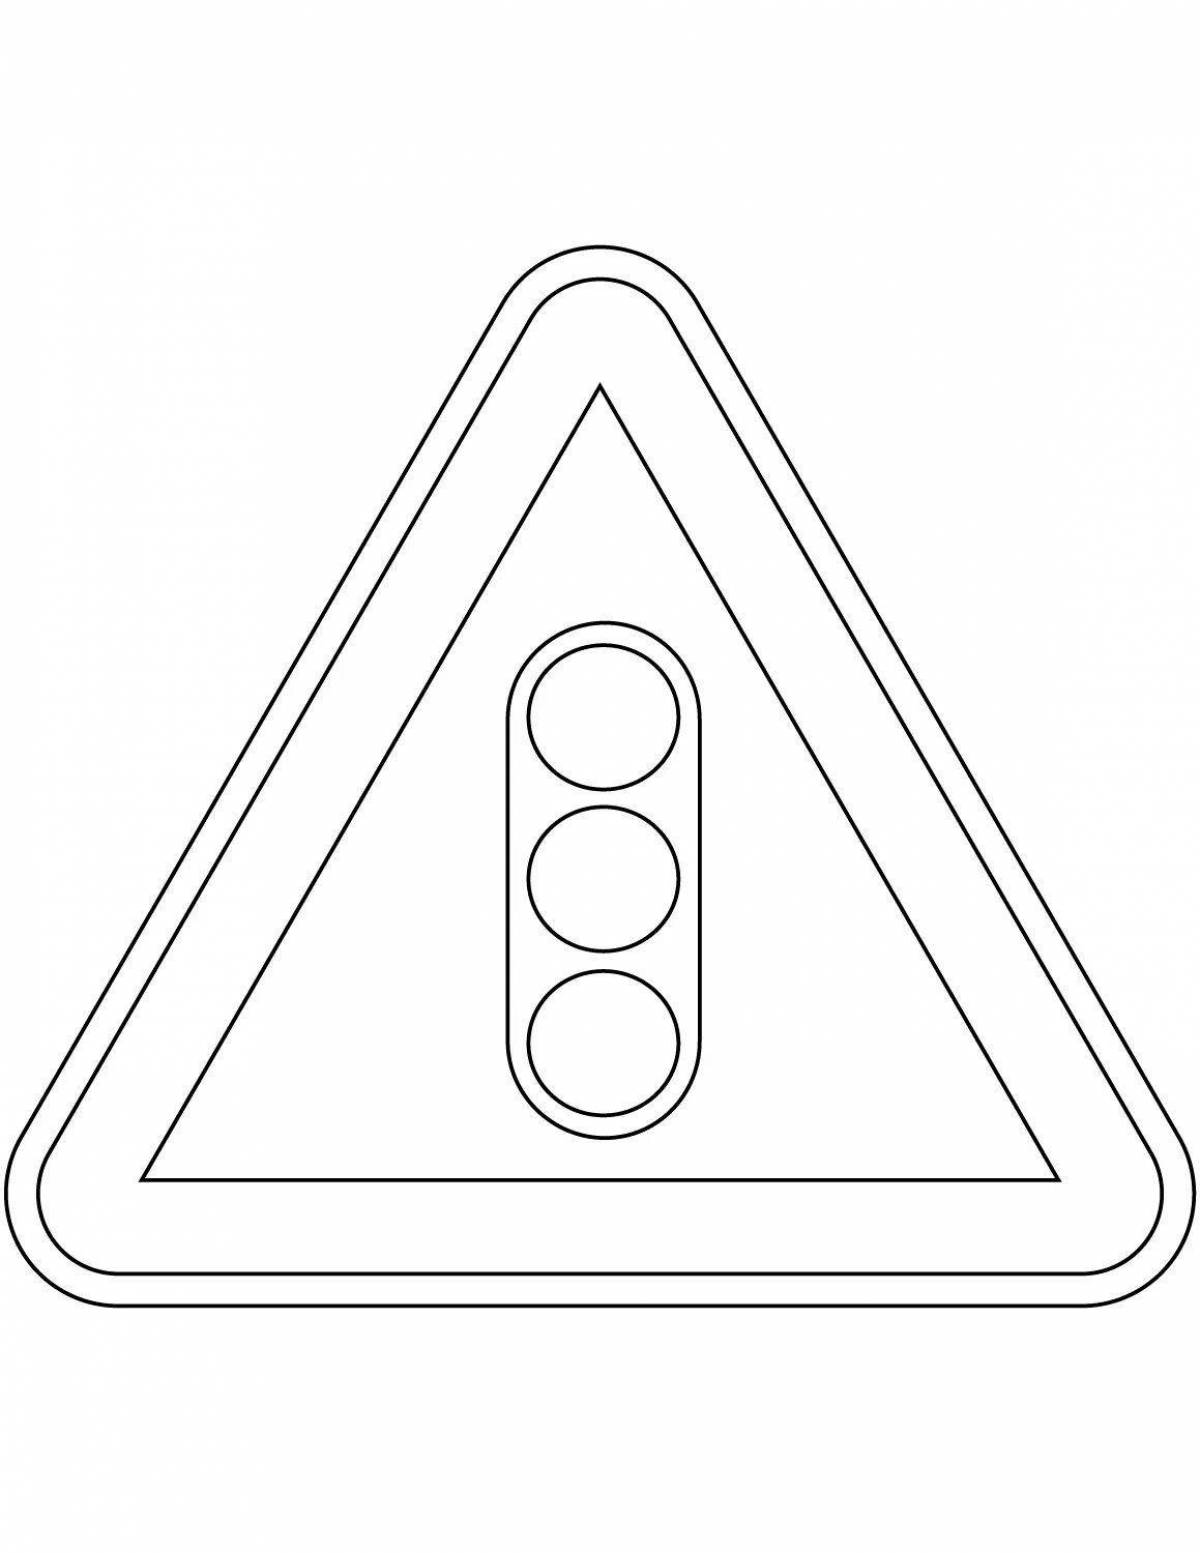 Exciting warning signs coloring page